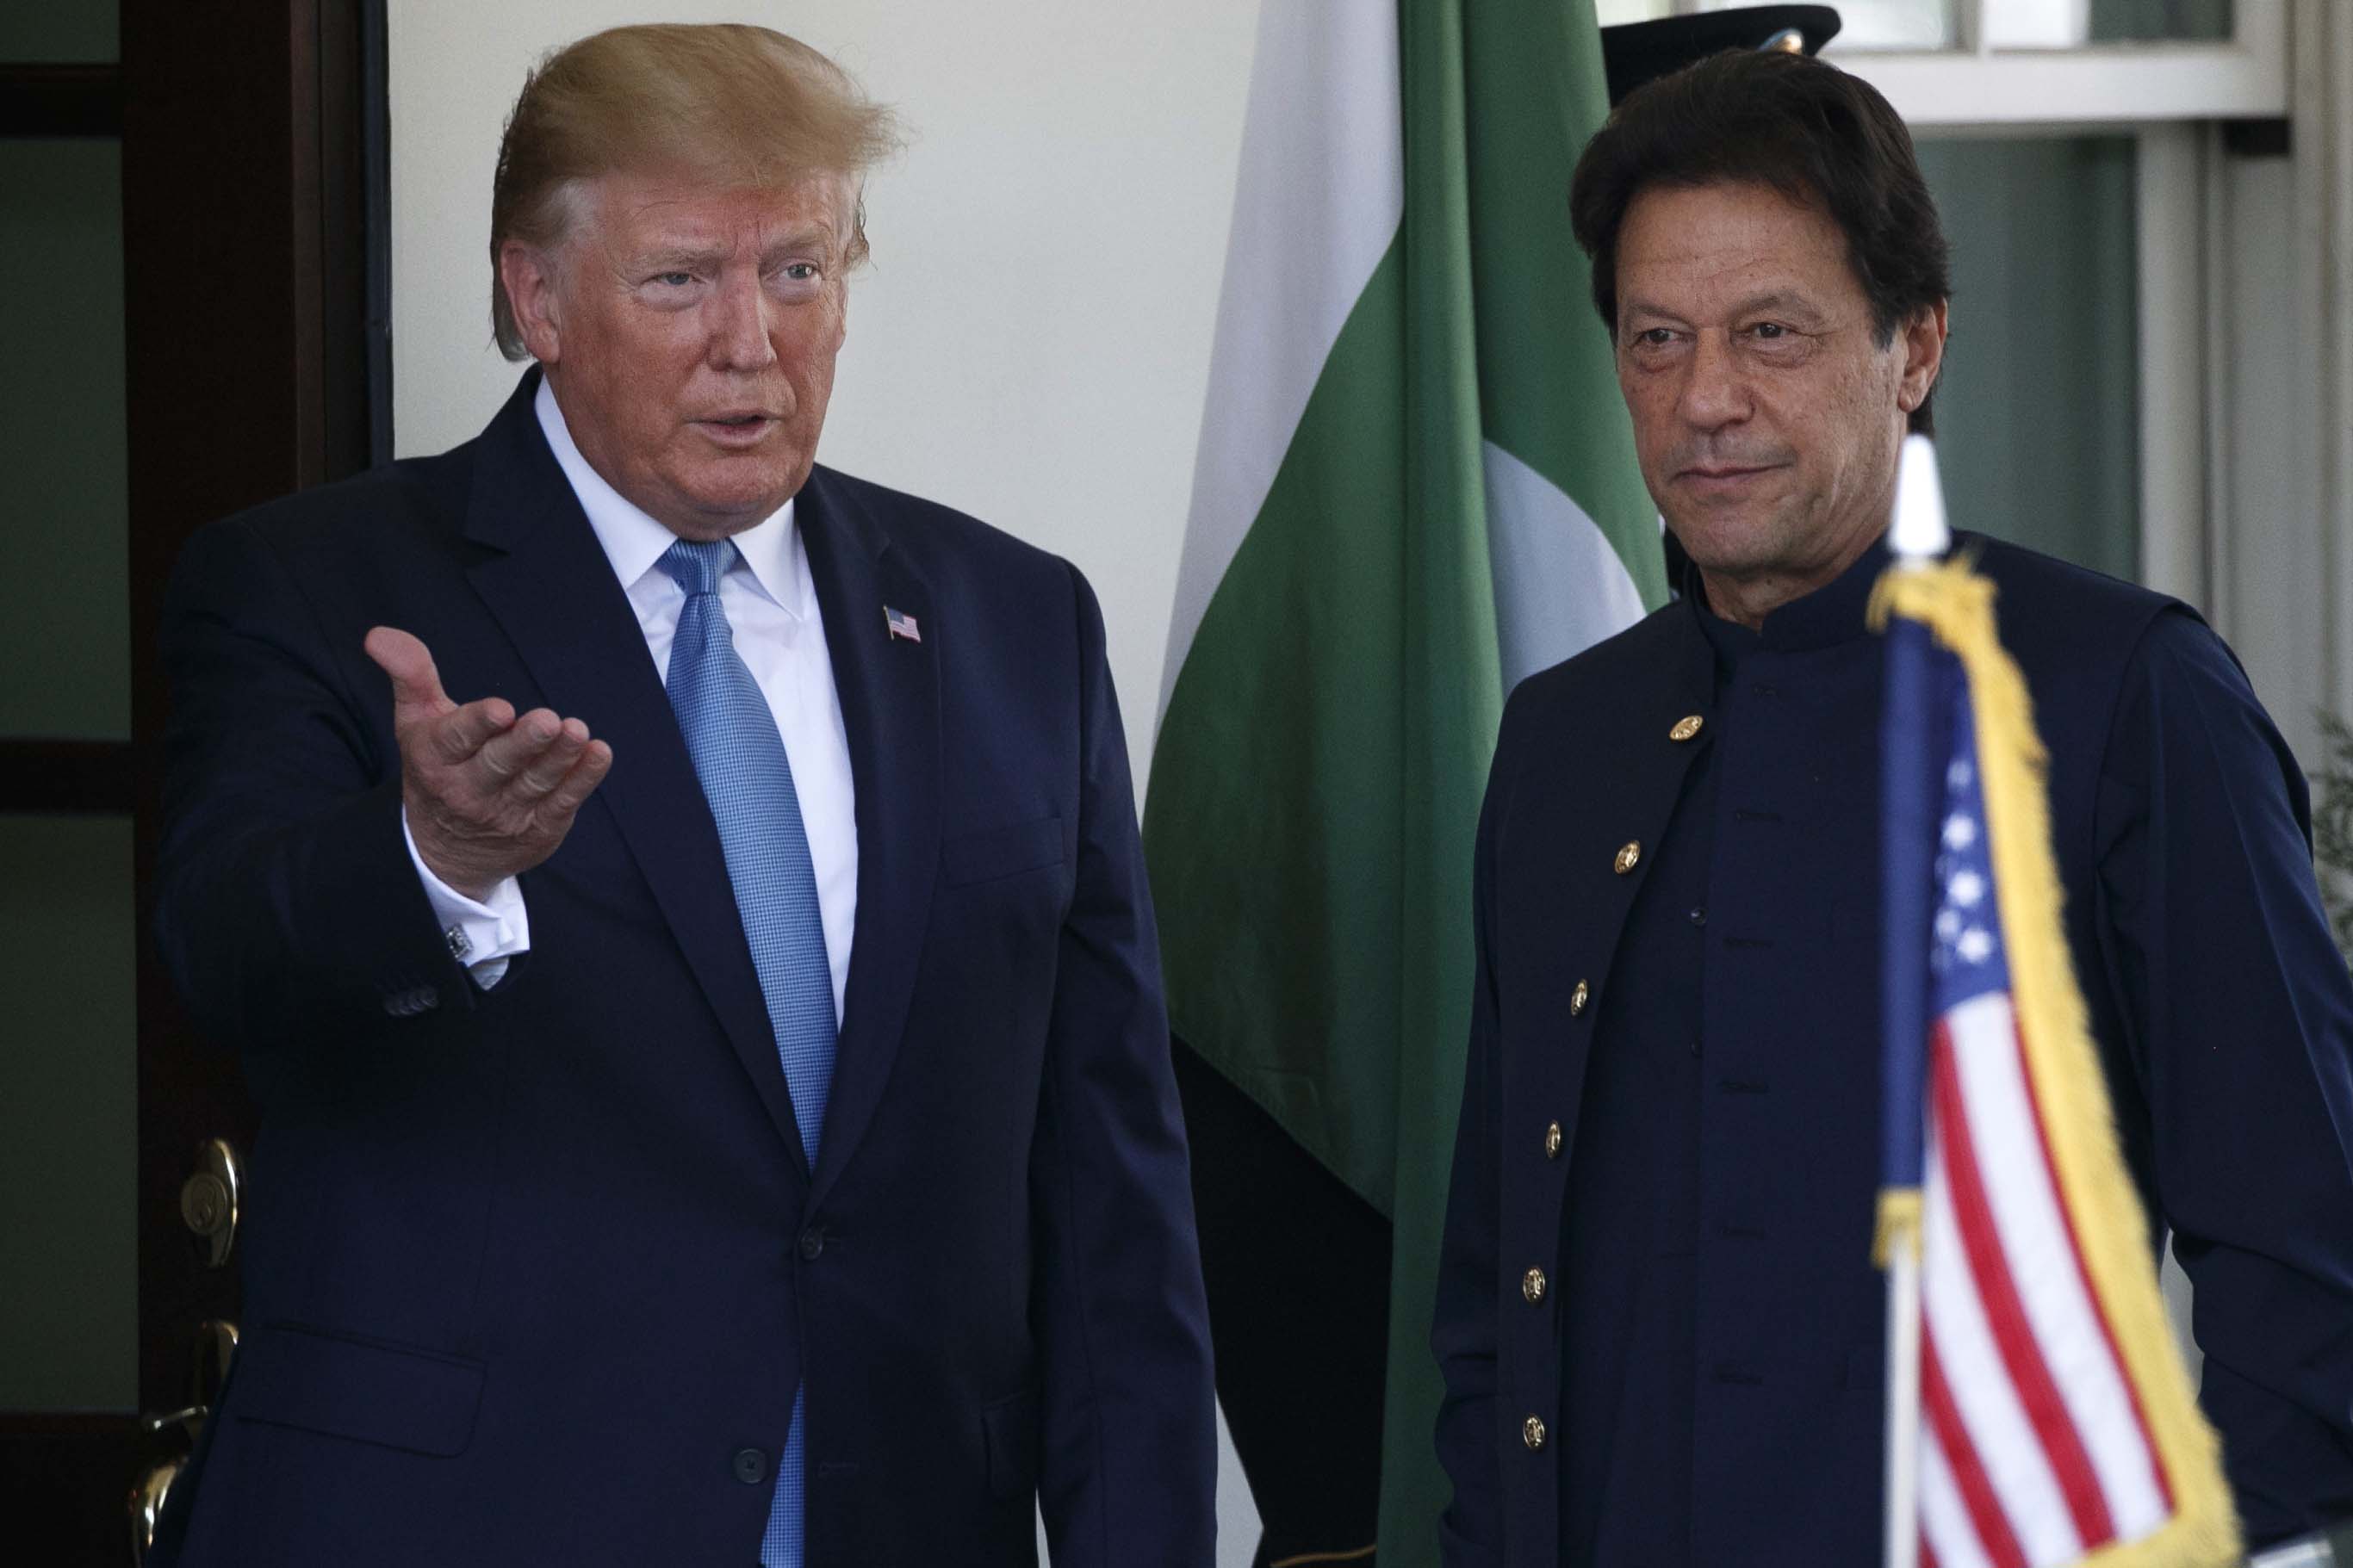 Trump asks Imran to resolve tensions with India bilaterally